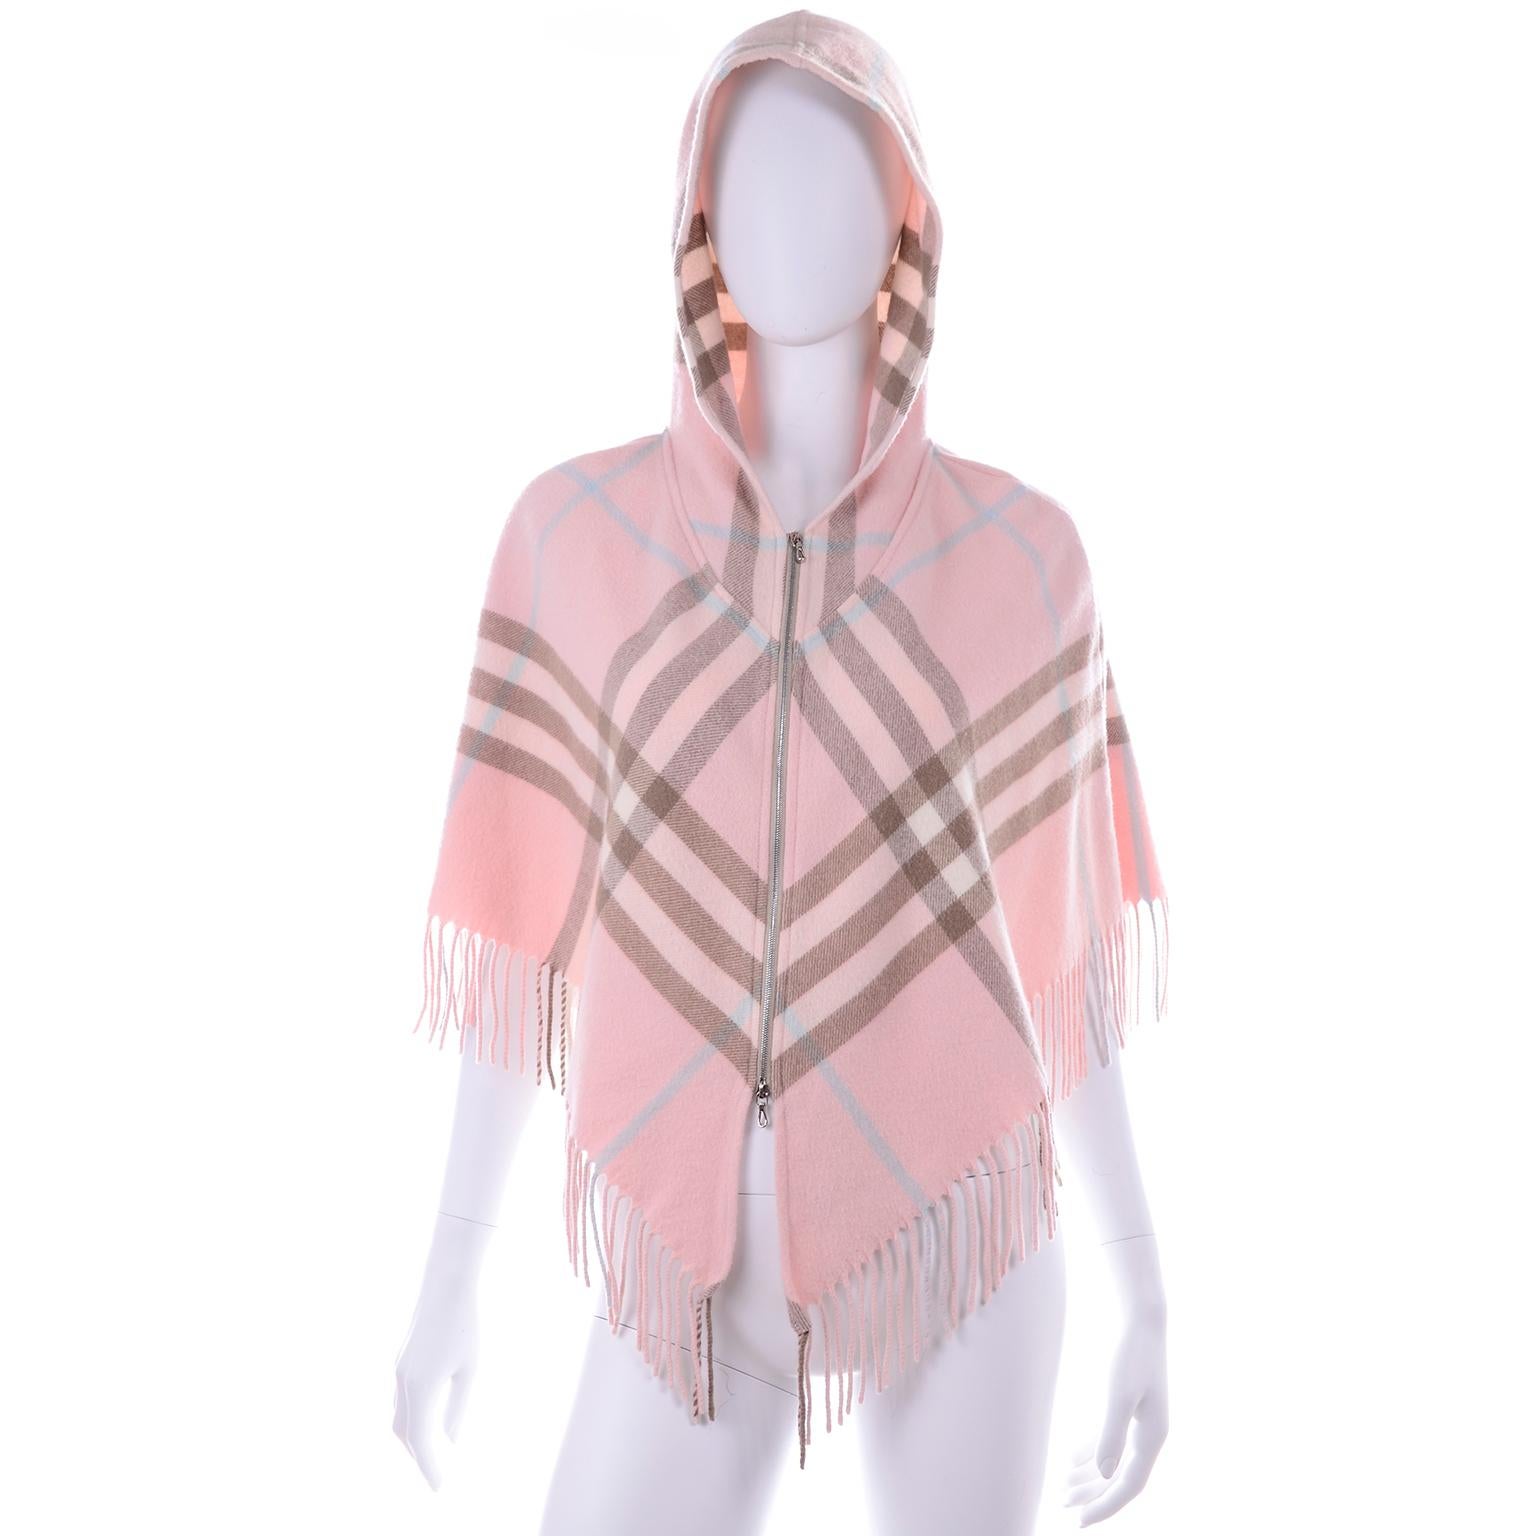 This is a pretty Pink Plaid Burberry poncho with a hood. Cropped style so can fit up to a size Medium and it has a metal zipper down the center front with a bottom zipper that can be worn open from the bottom.  Made in Scotland. of 90% Merino Wool